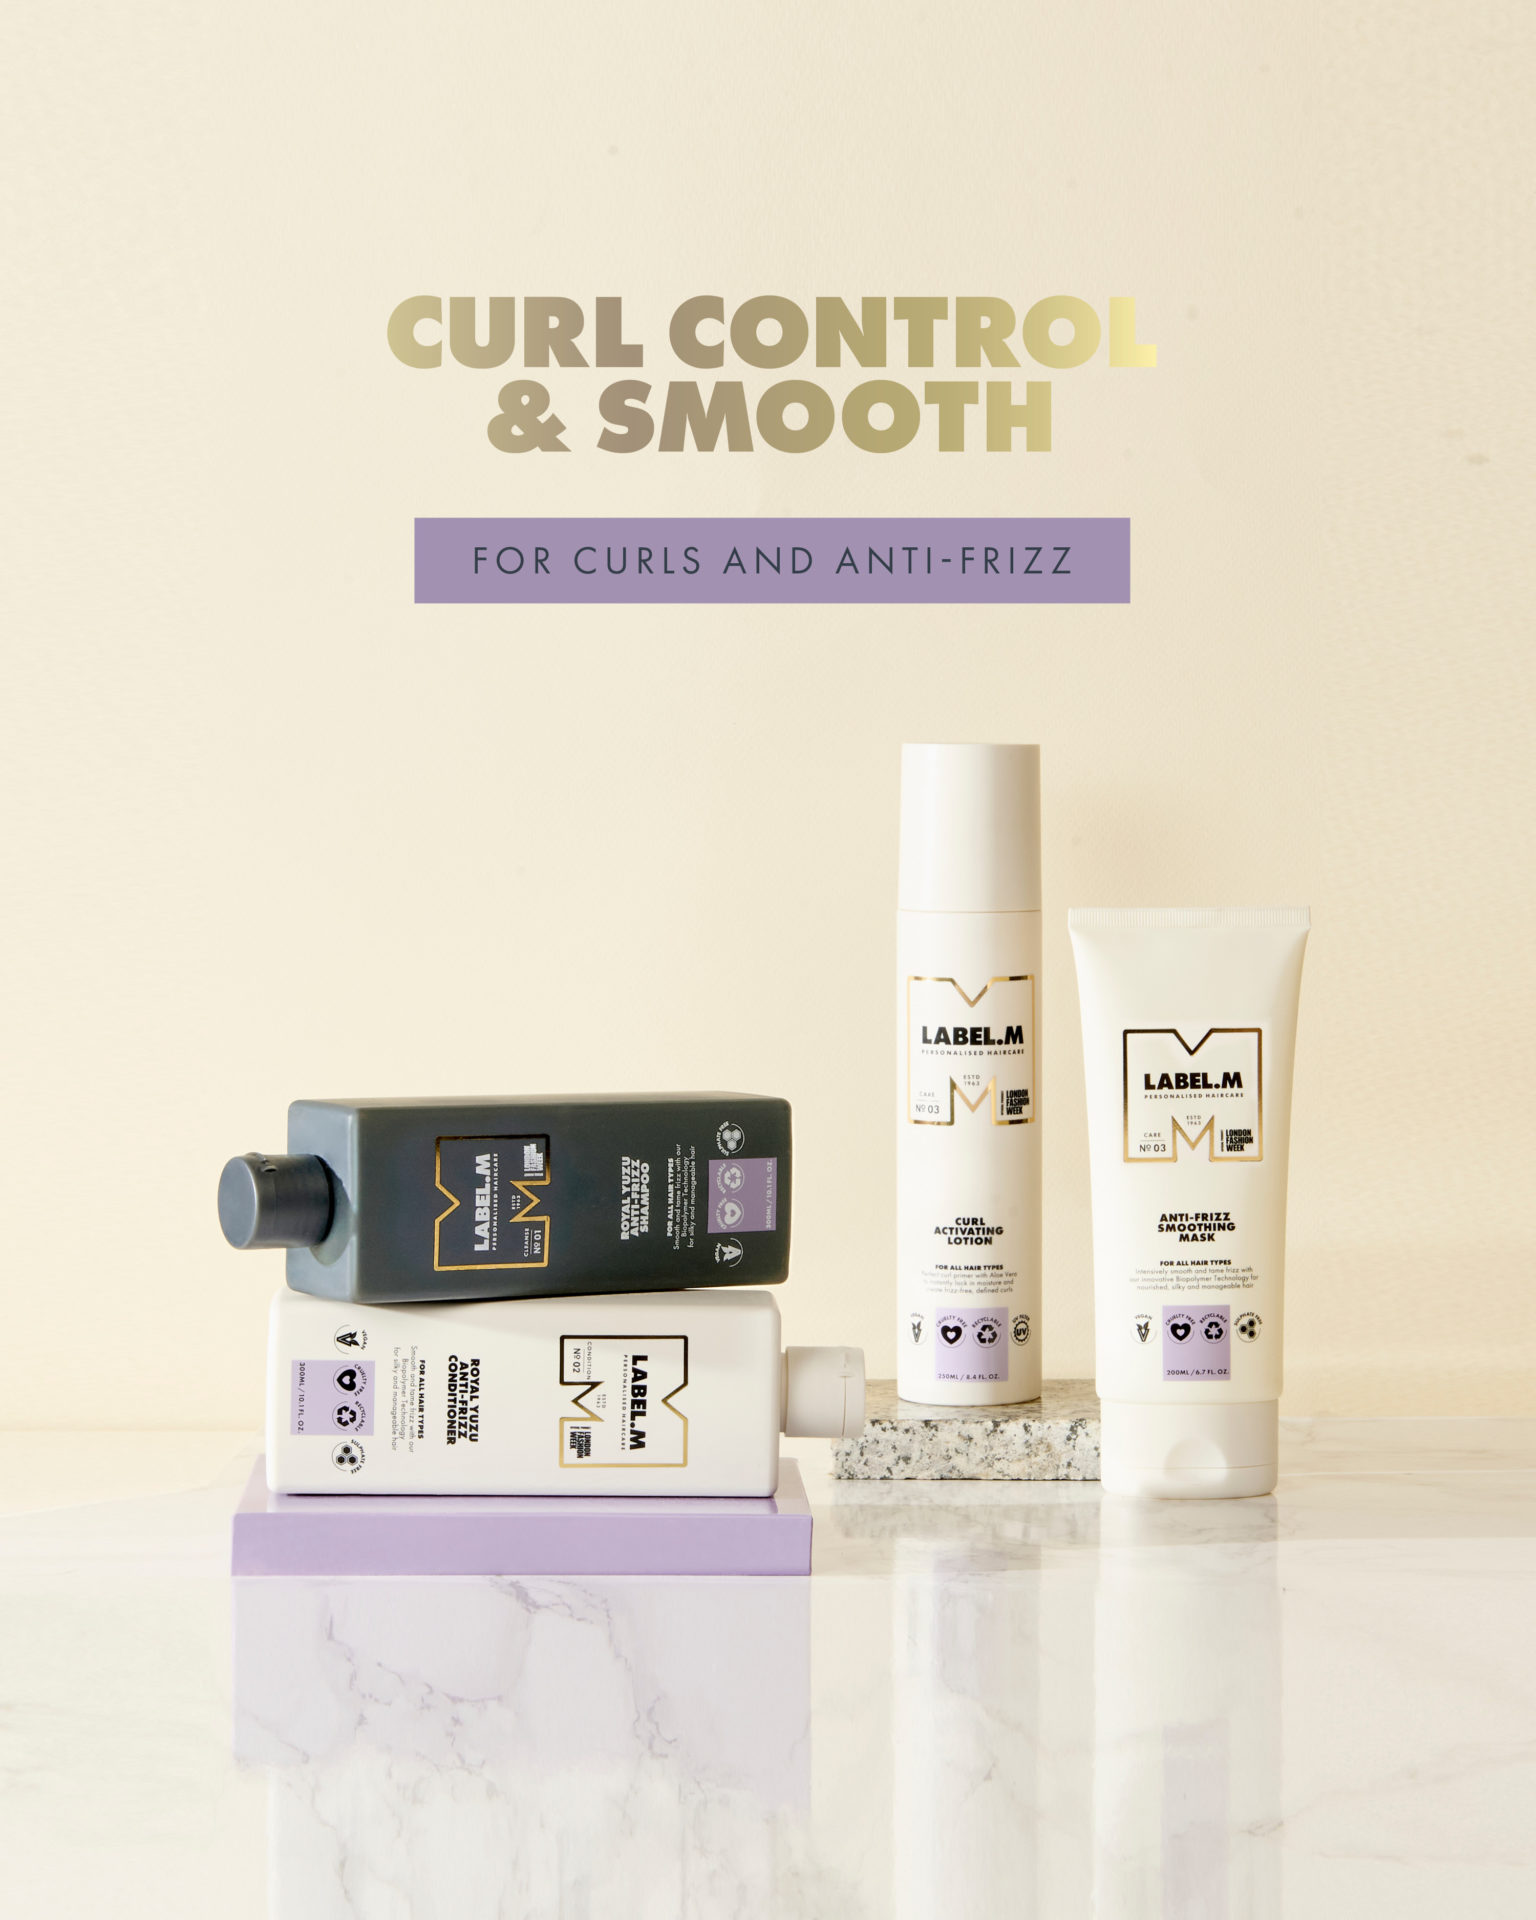 CURL CONTROL AND SMOOTH AT MUSE HAIR AND BEAUTY SALON IN BROADWAY WORCESTERHSIRE